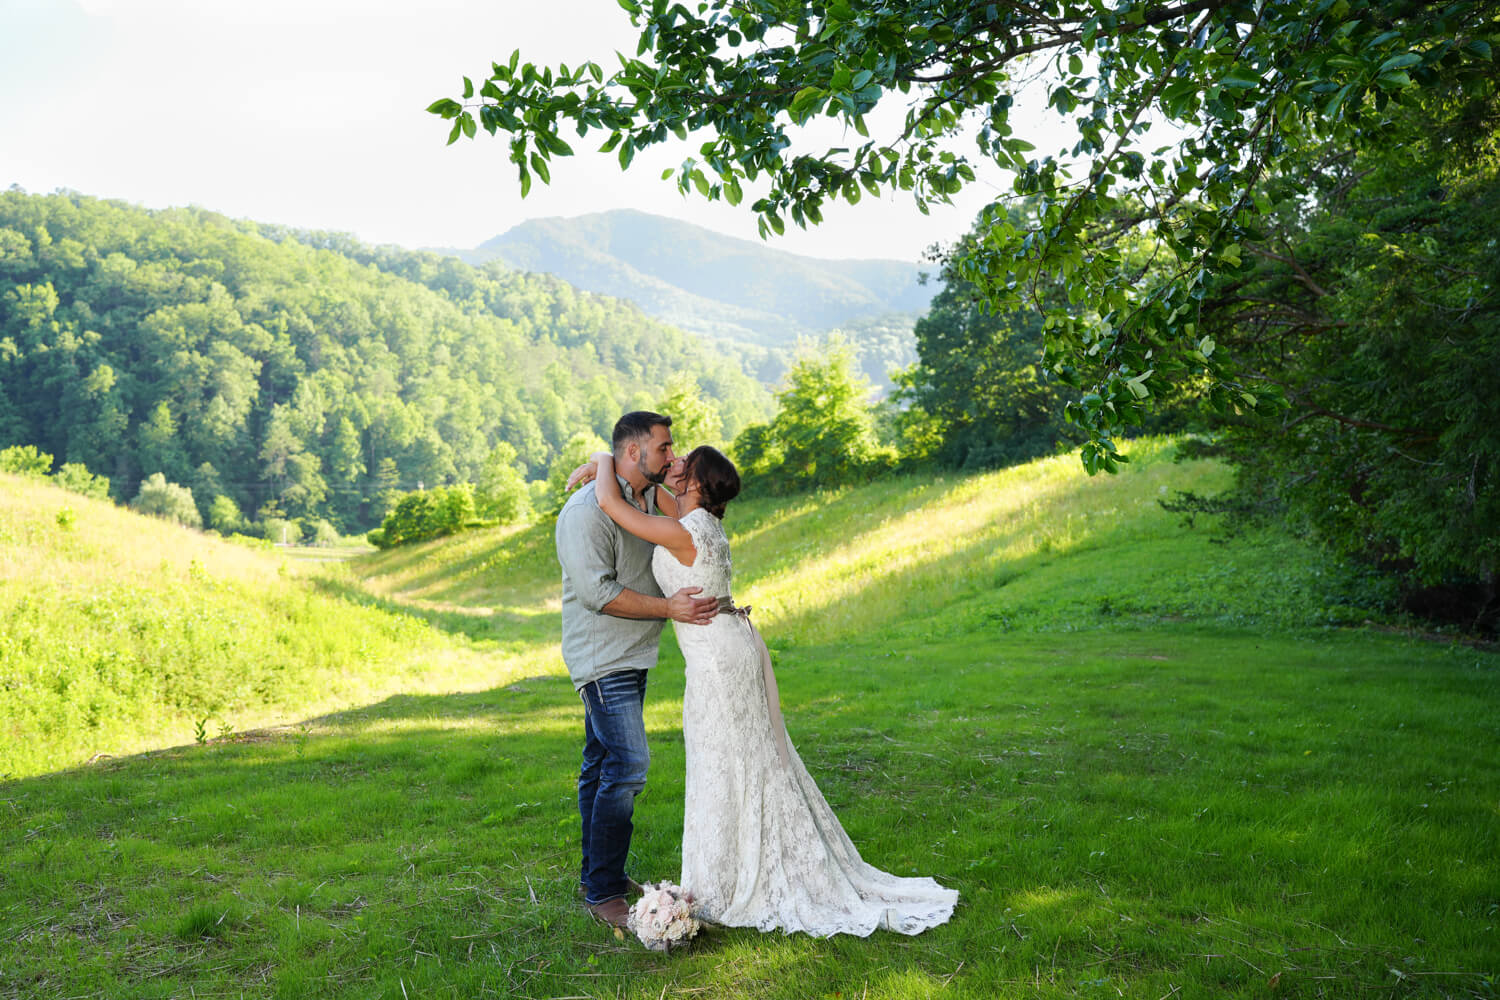 Bride arching upward to kiss her groom passionately at the mountain view ceremony site at Honeysuckle Hills in Pigeon Forge